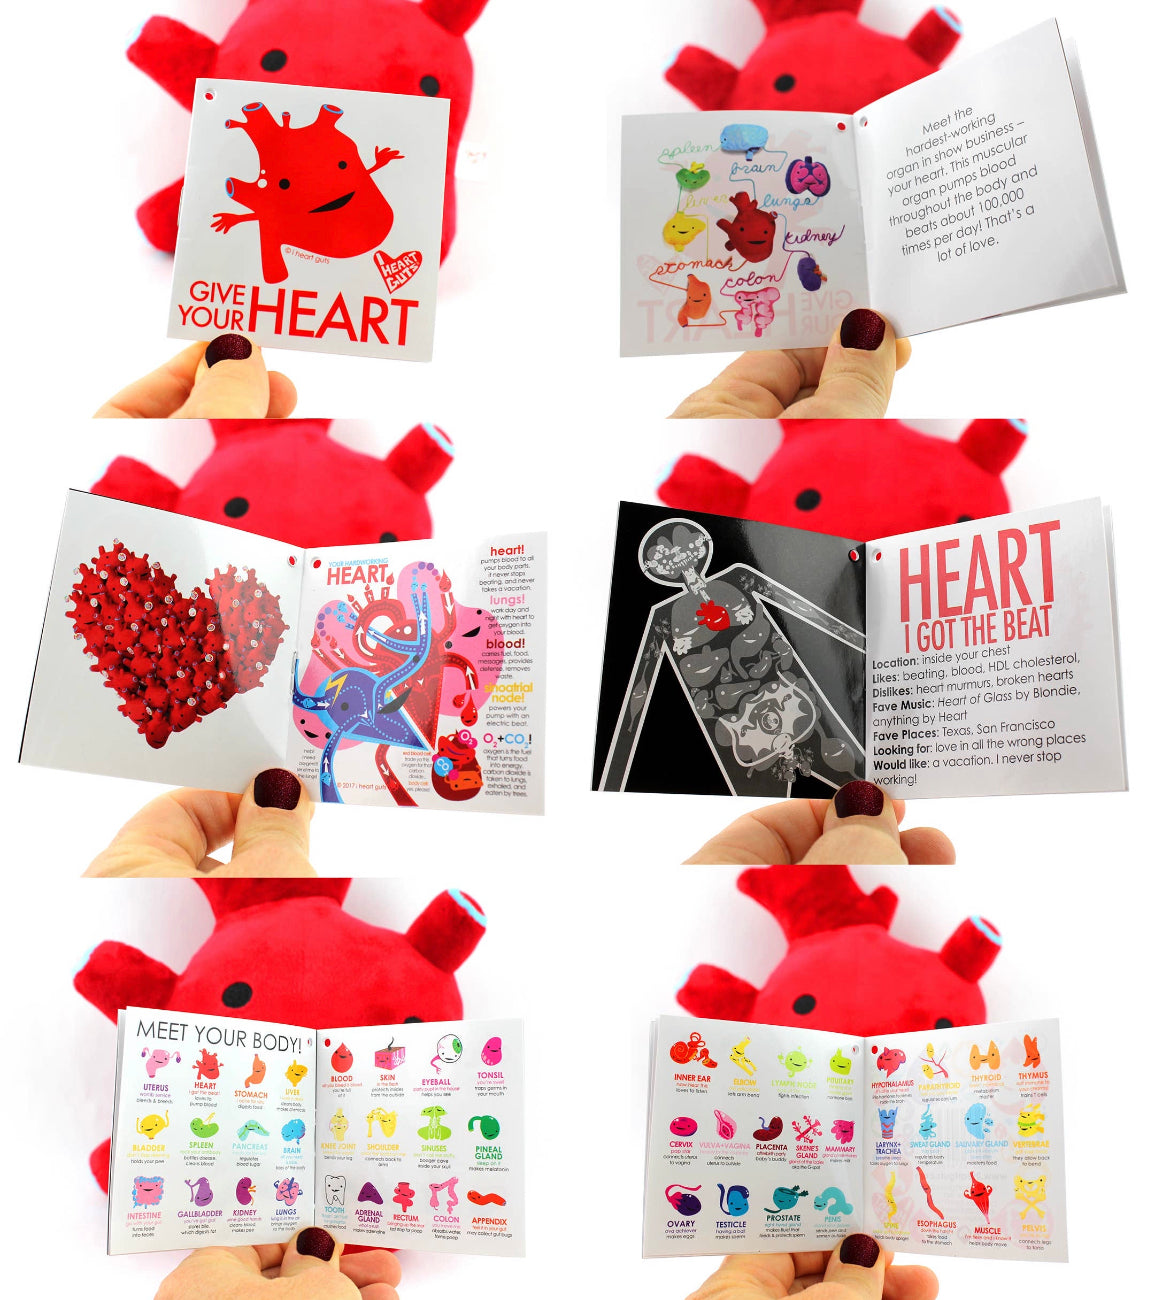 Heart Plush “Give your heart”